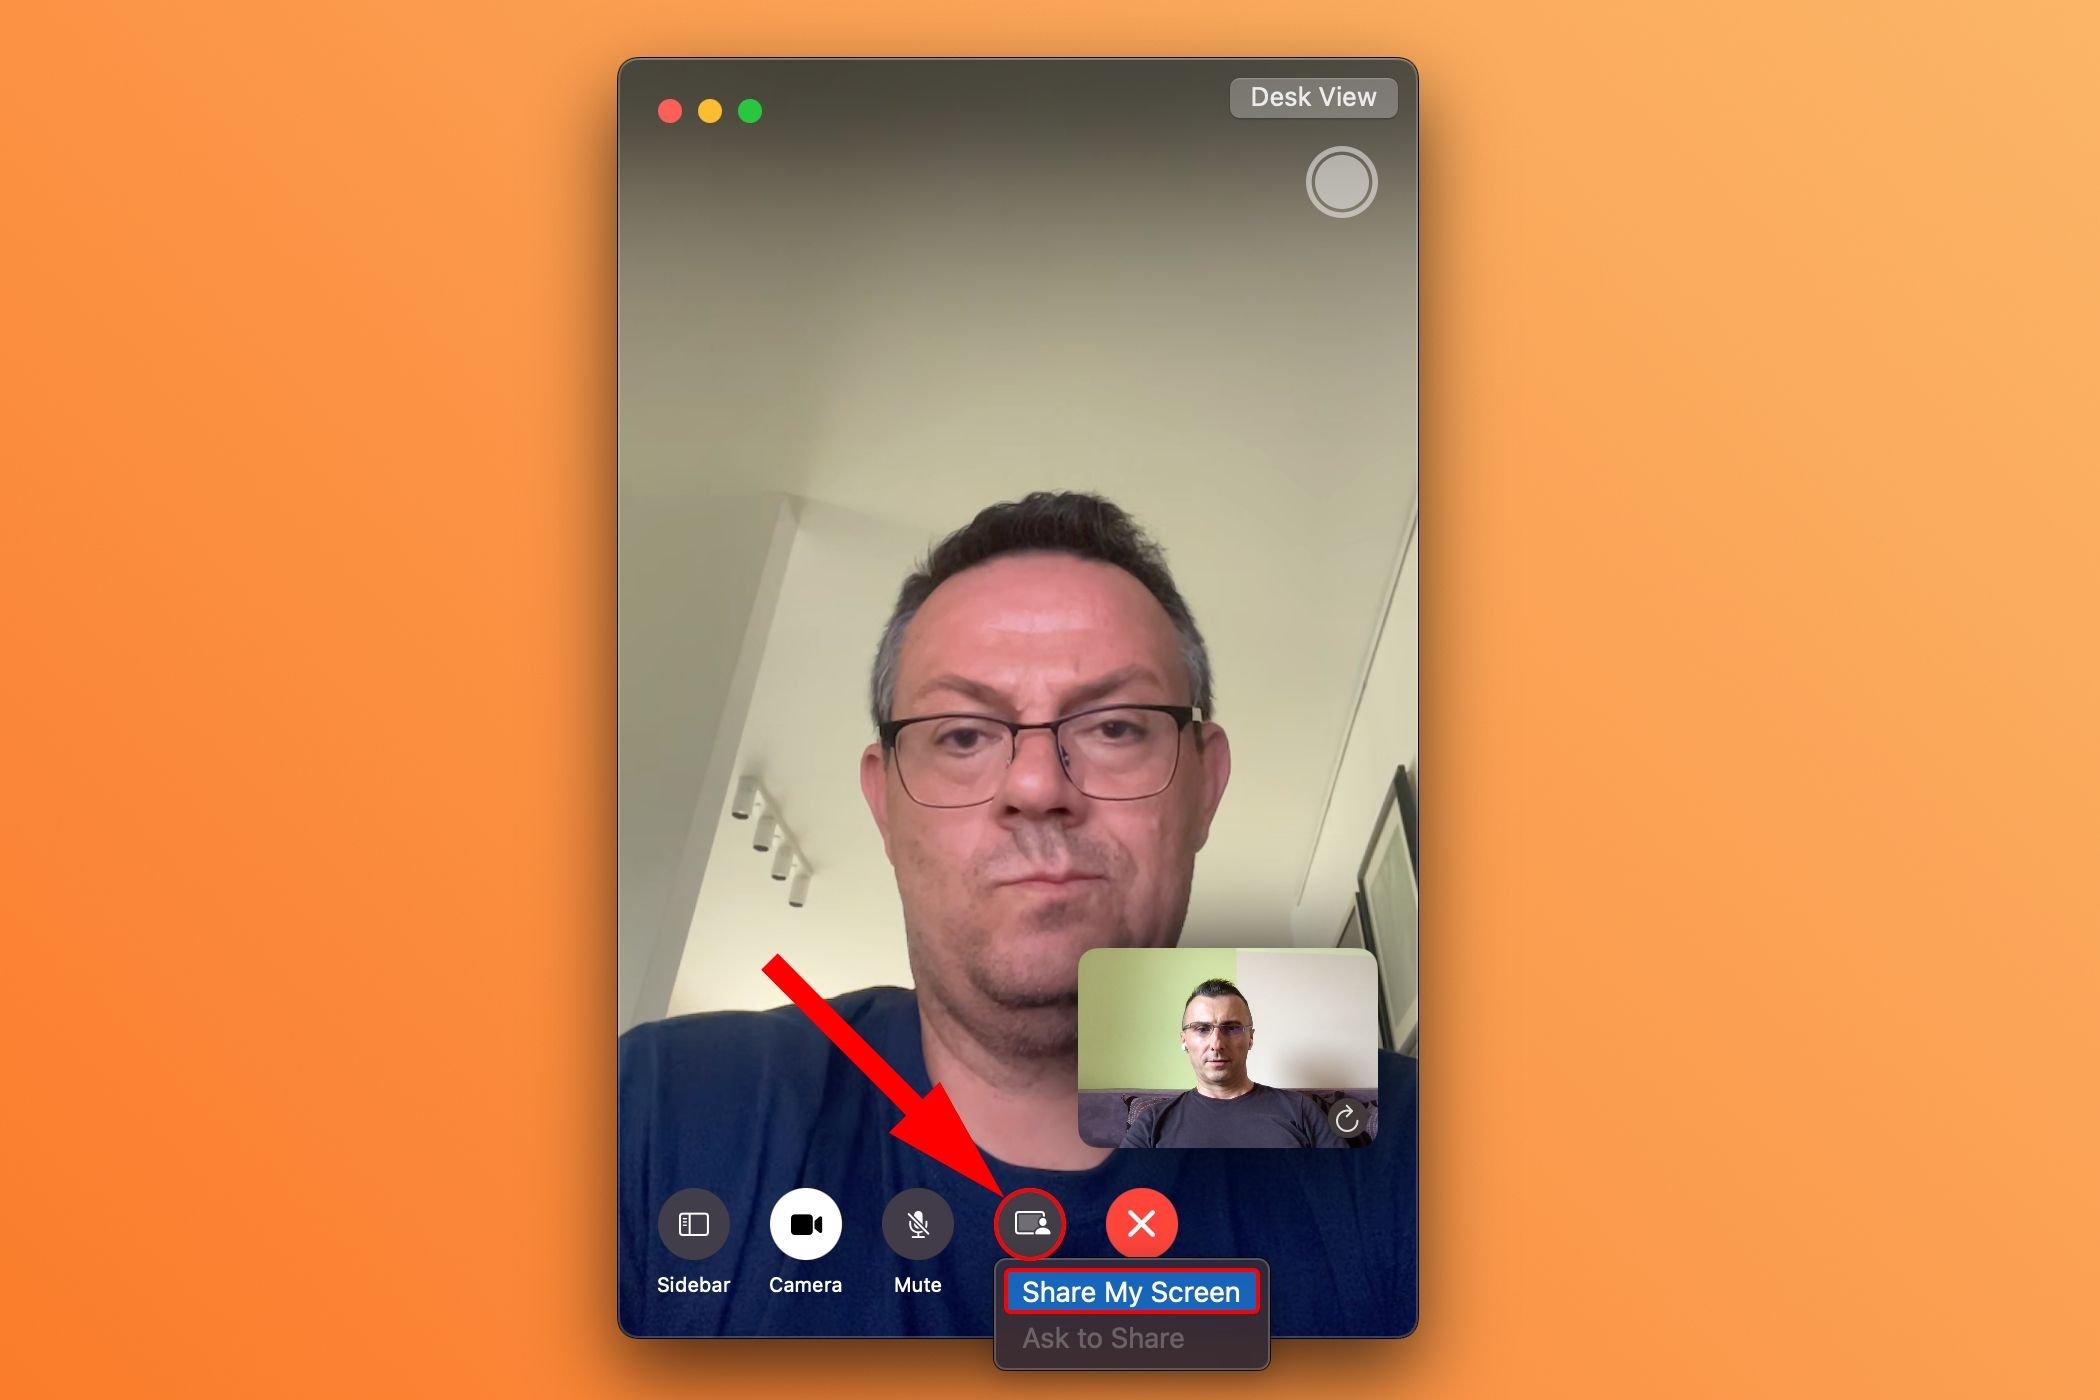 Choosing the screen sharing option during a FaceTime video call on a Mac.